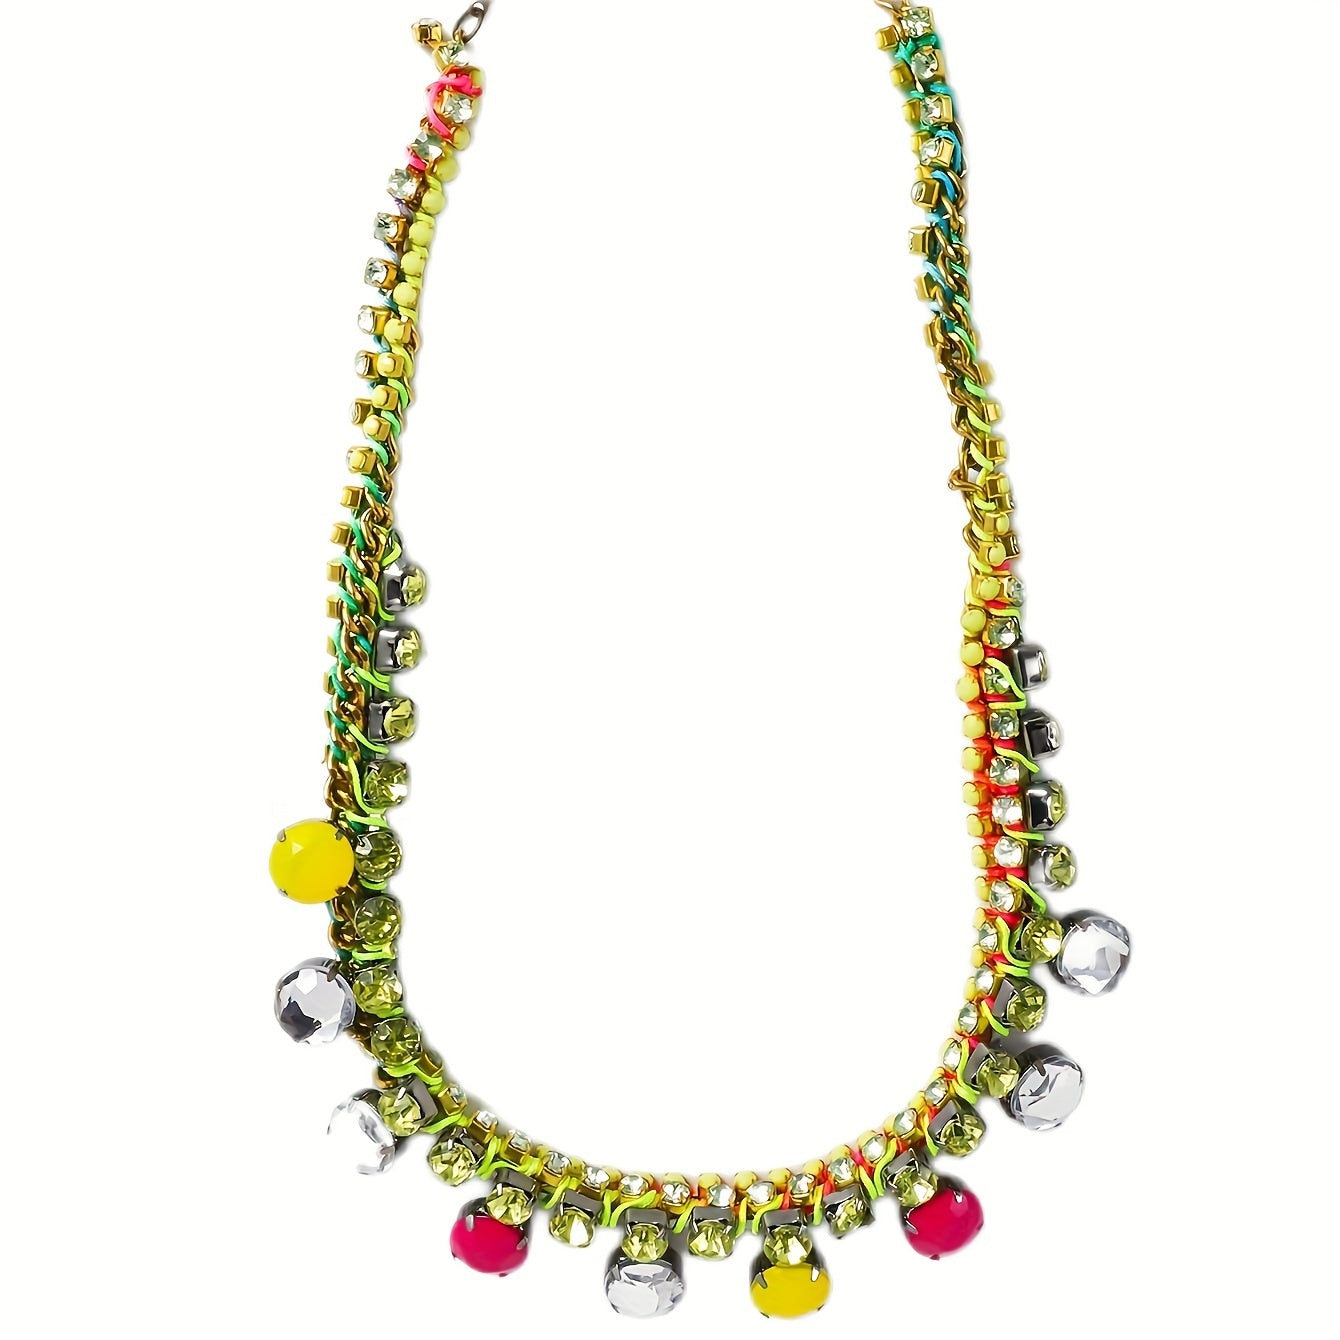 Female Exaggerated Multicolor Rhinestone Accessories Collarbone Chain Acrylic Necklace Jewelry Gift